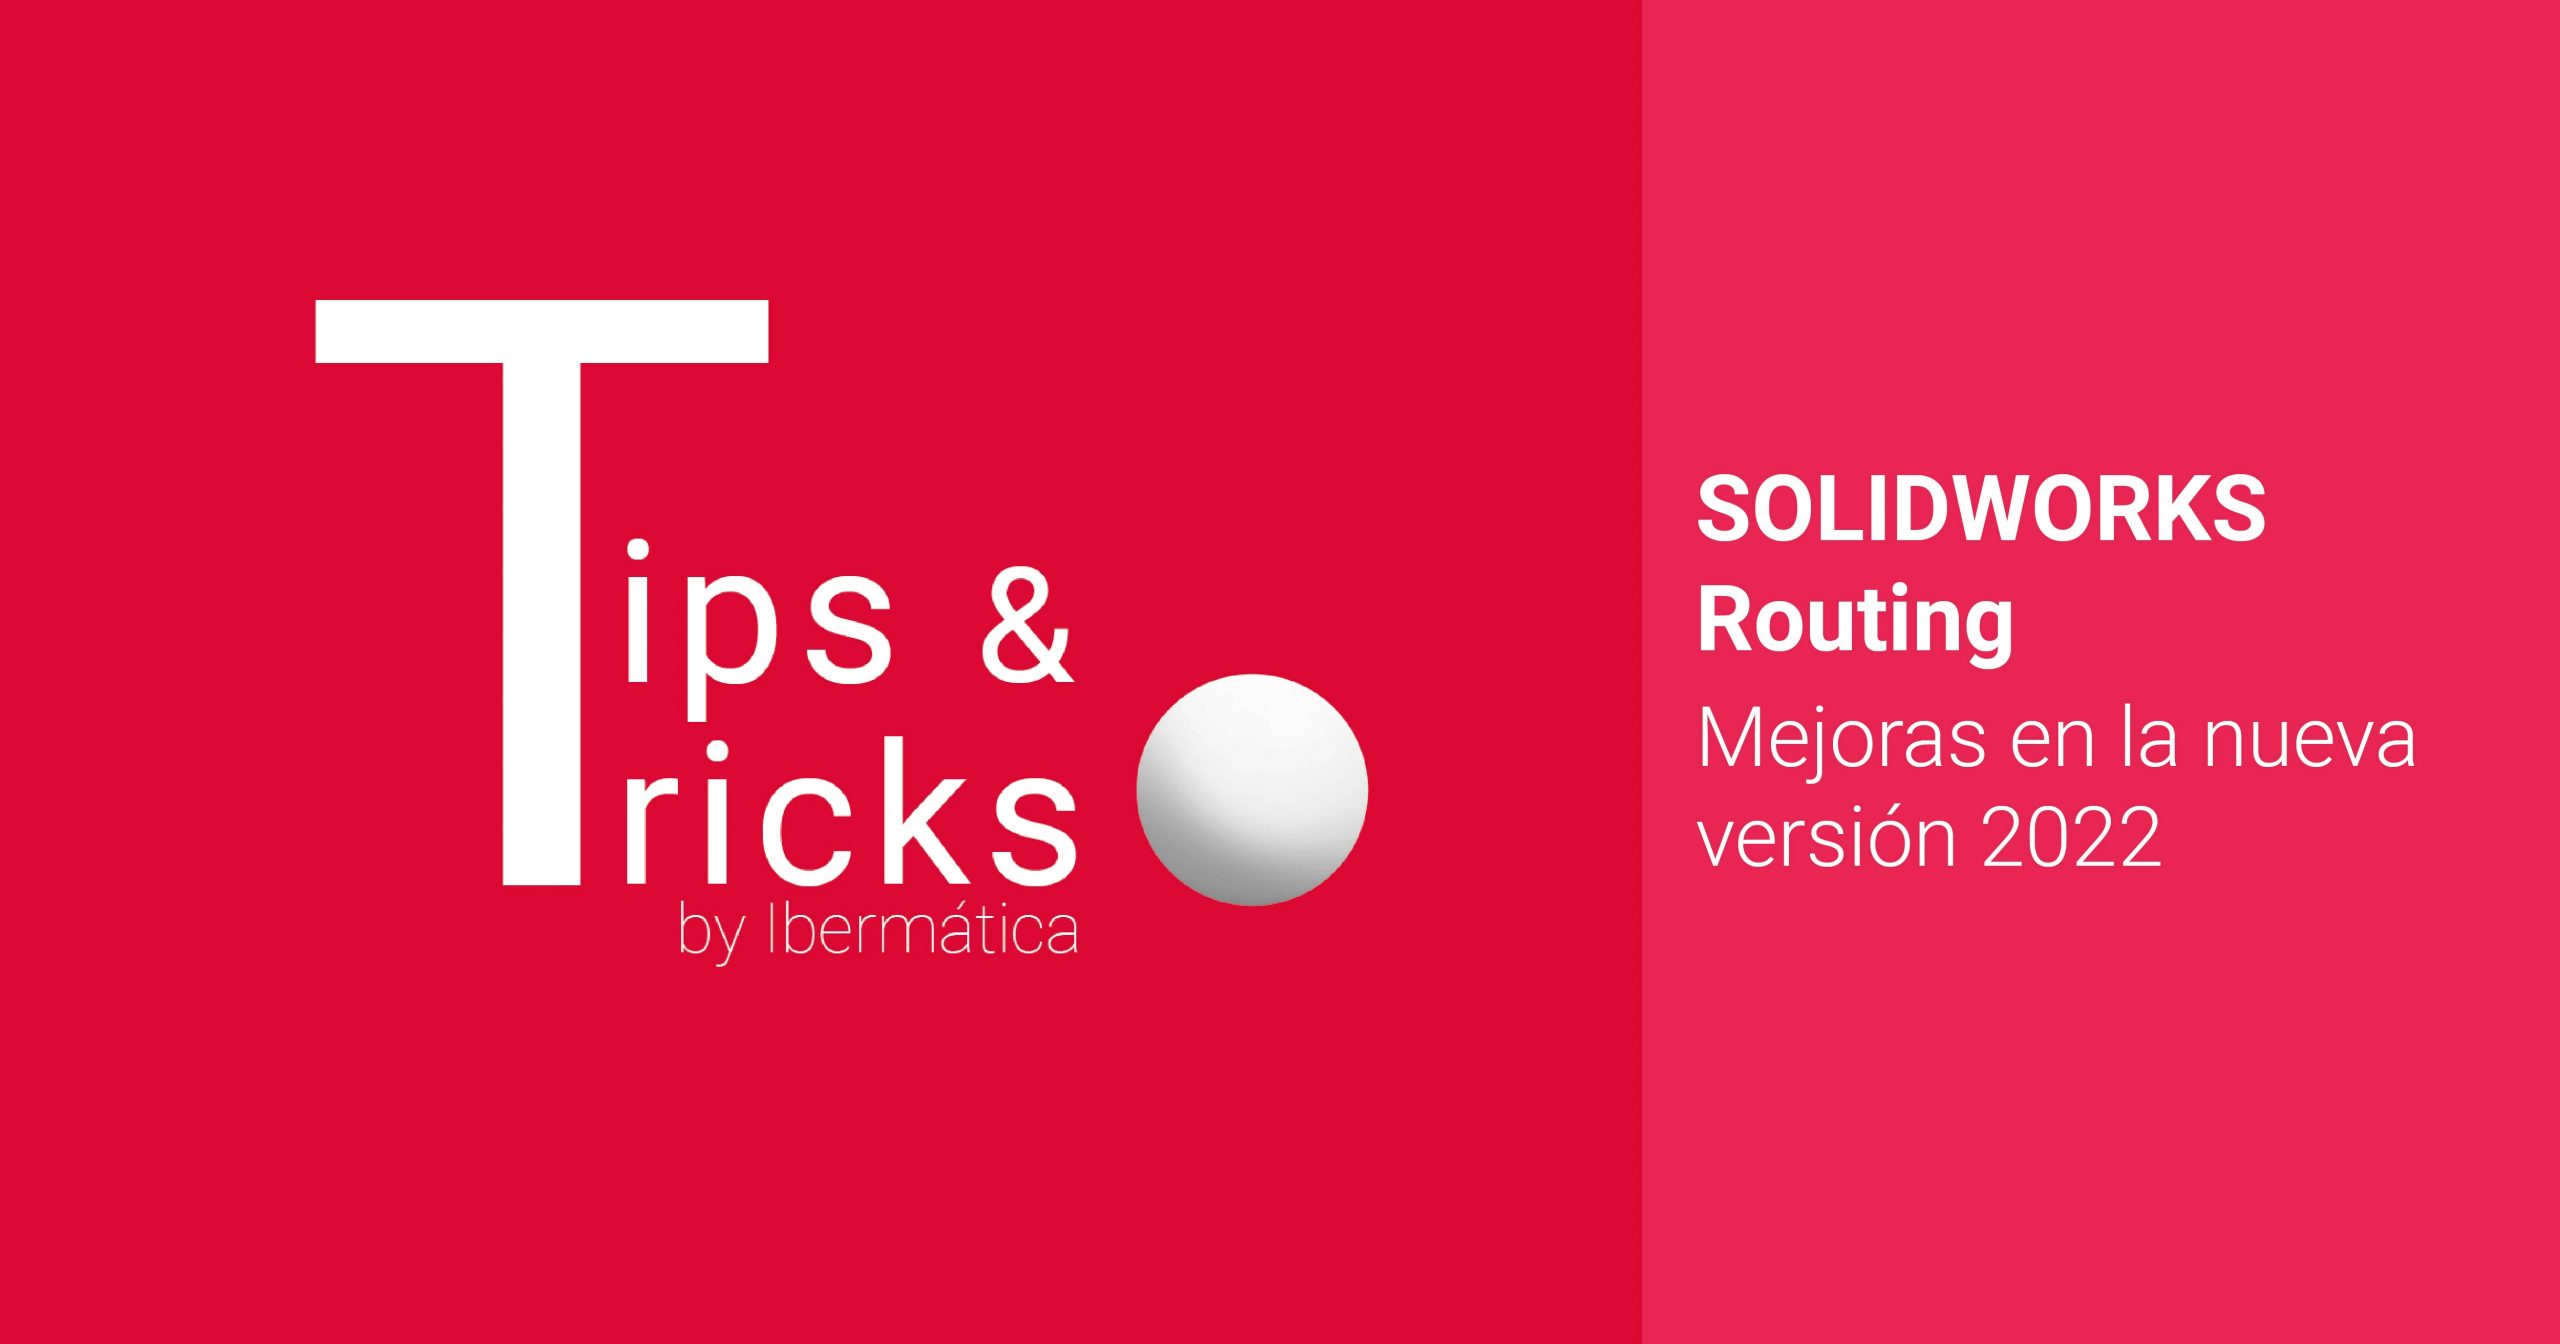 solidworks routing